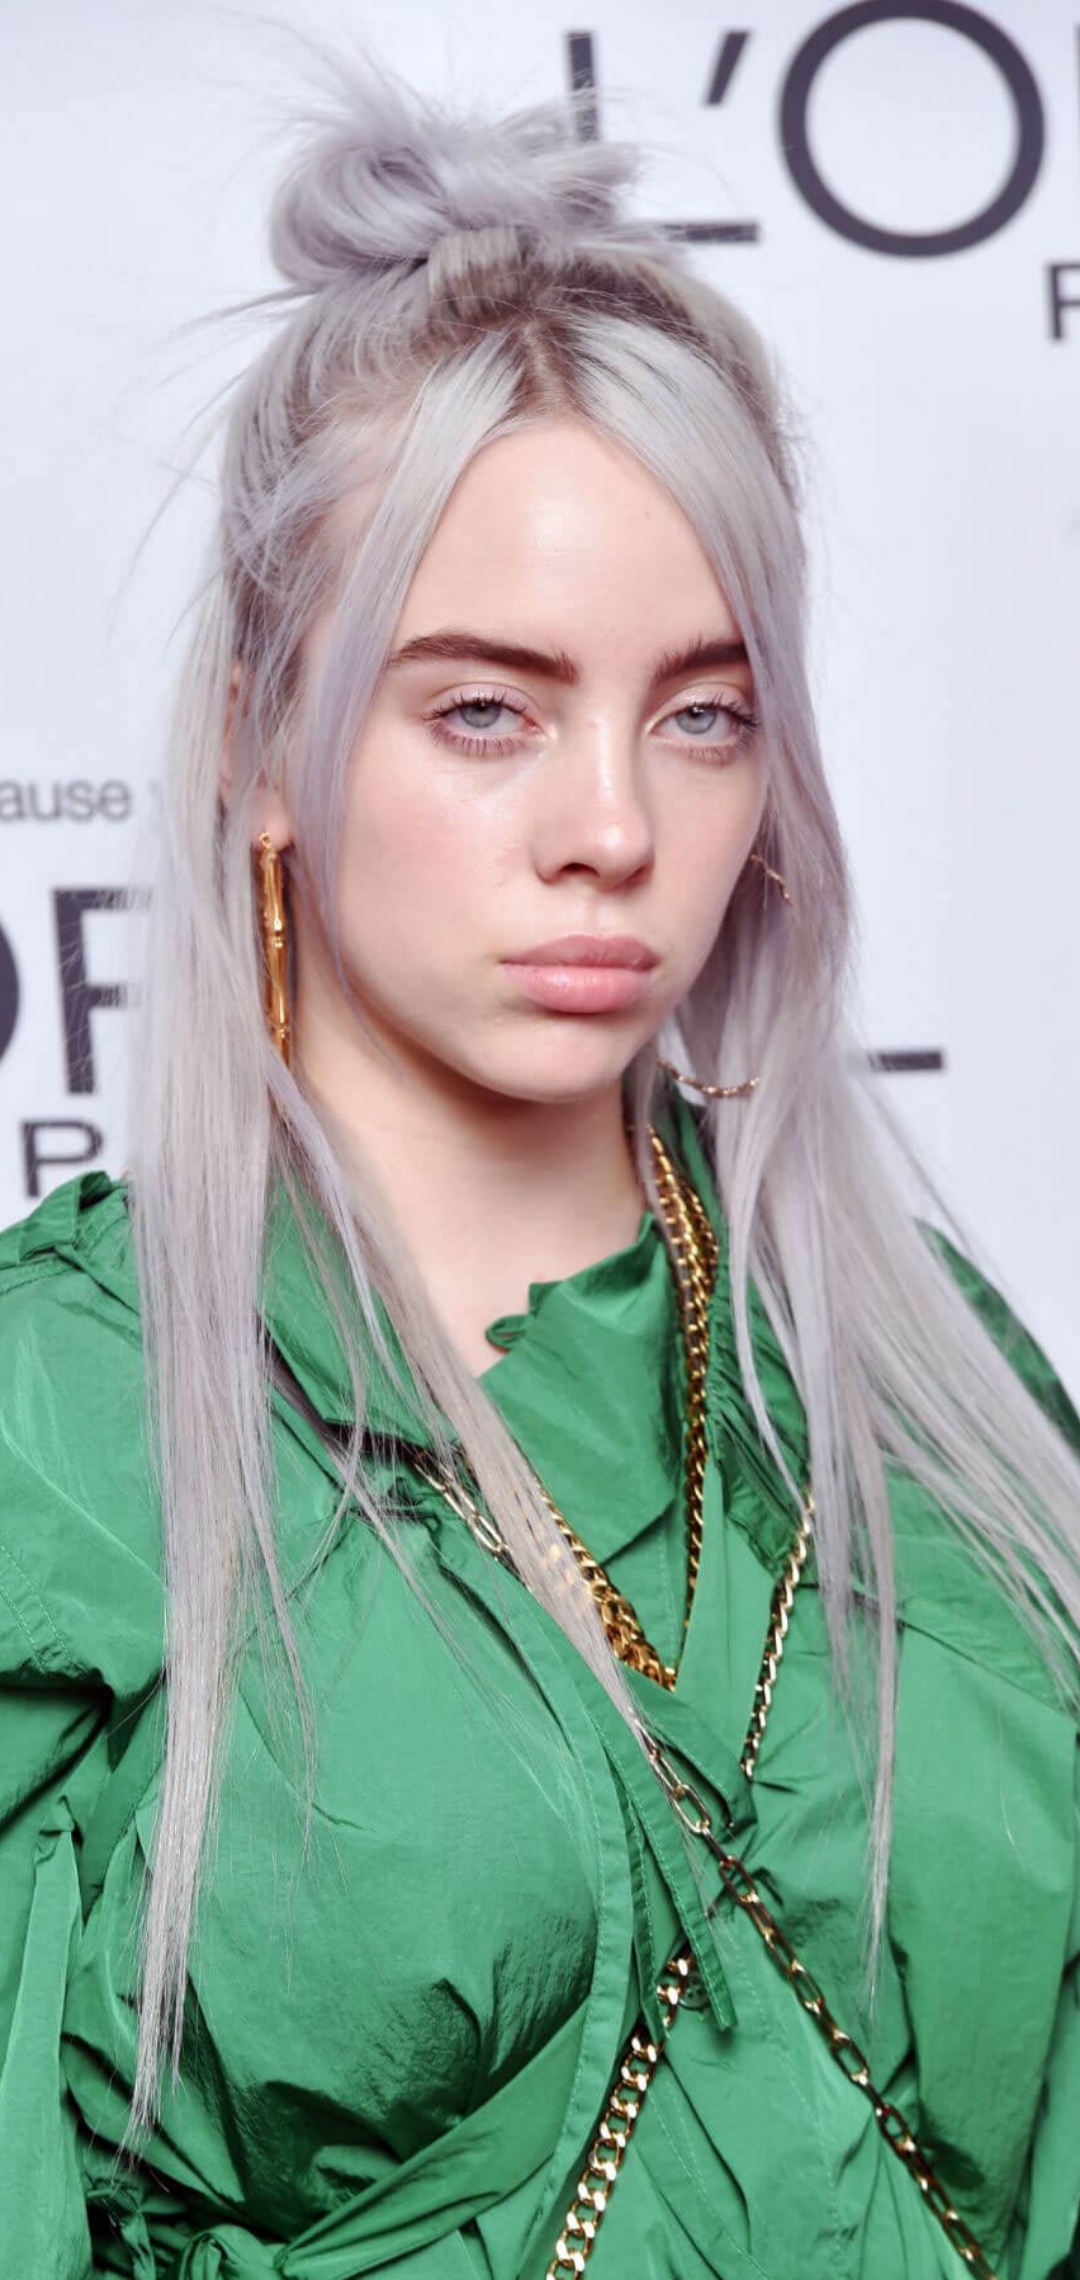 Billie Eilish Wallpaper Wall Giftwatches Co